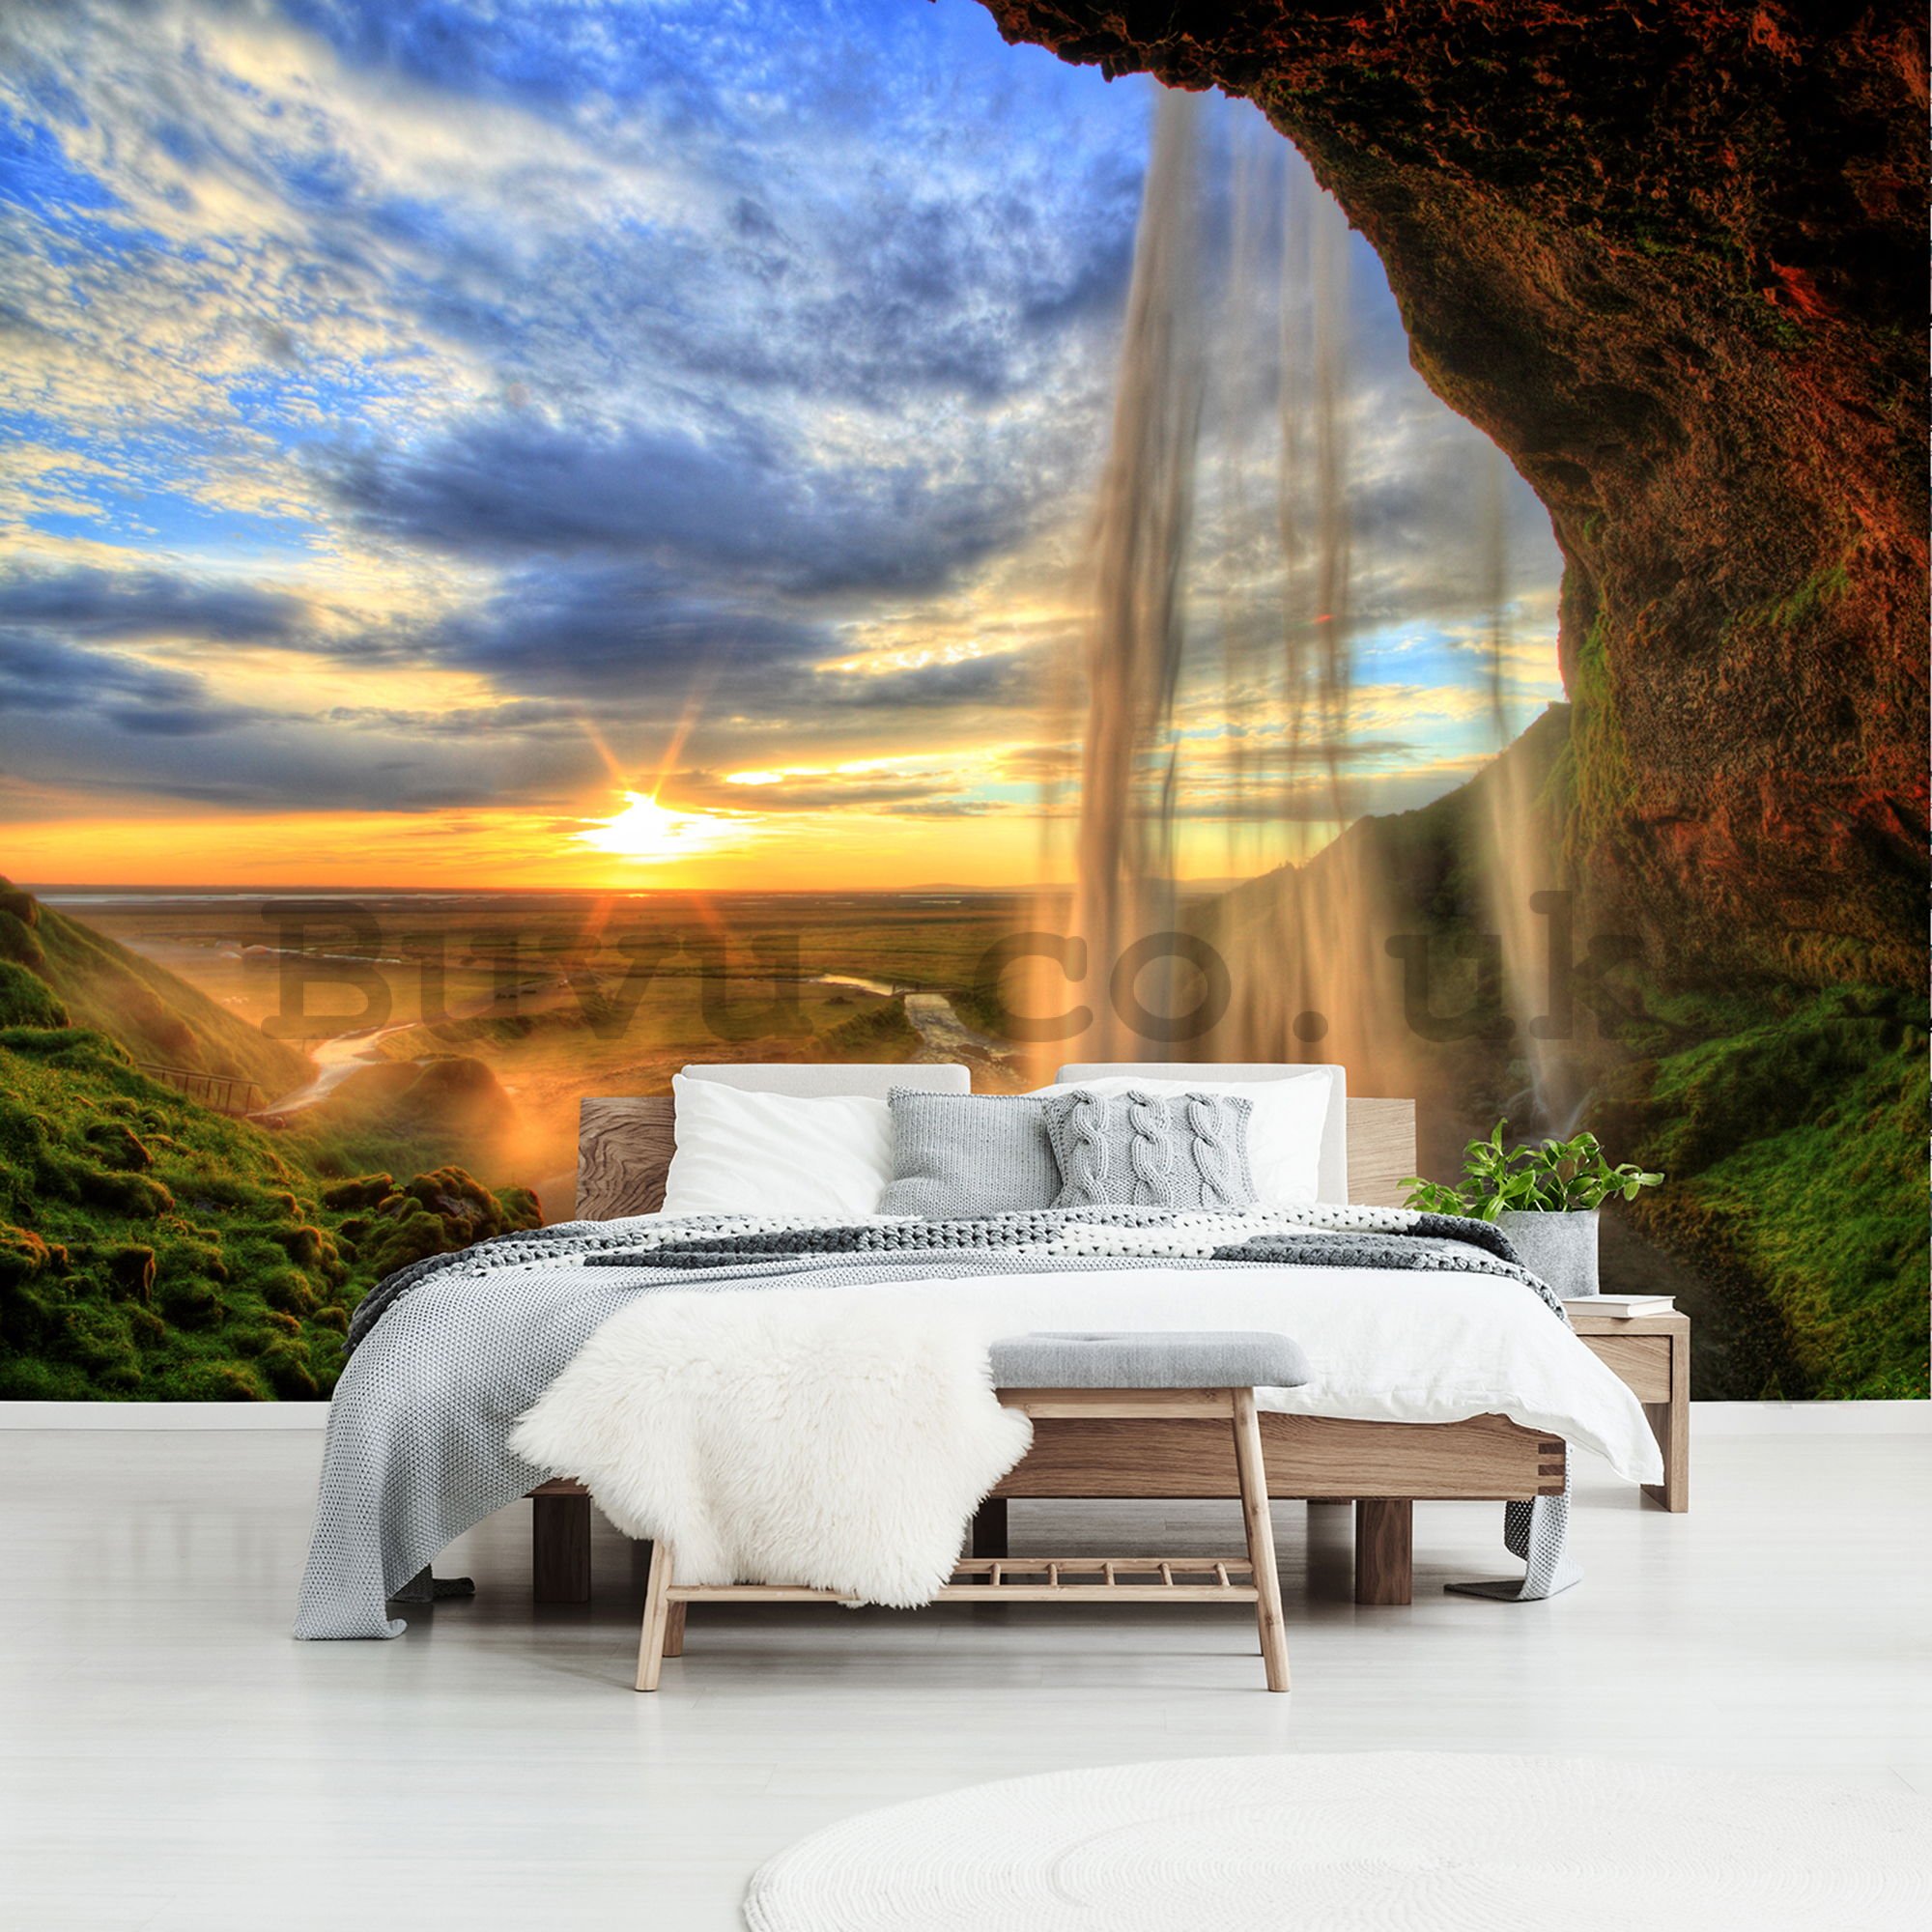 Wall mural: Waterfall at sunset - 254x368 cm